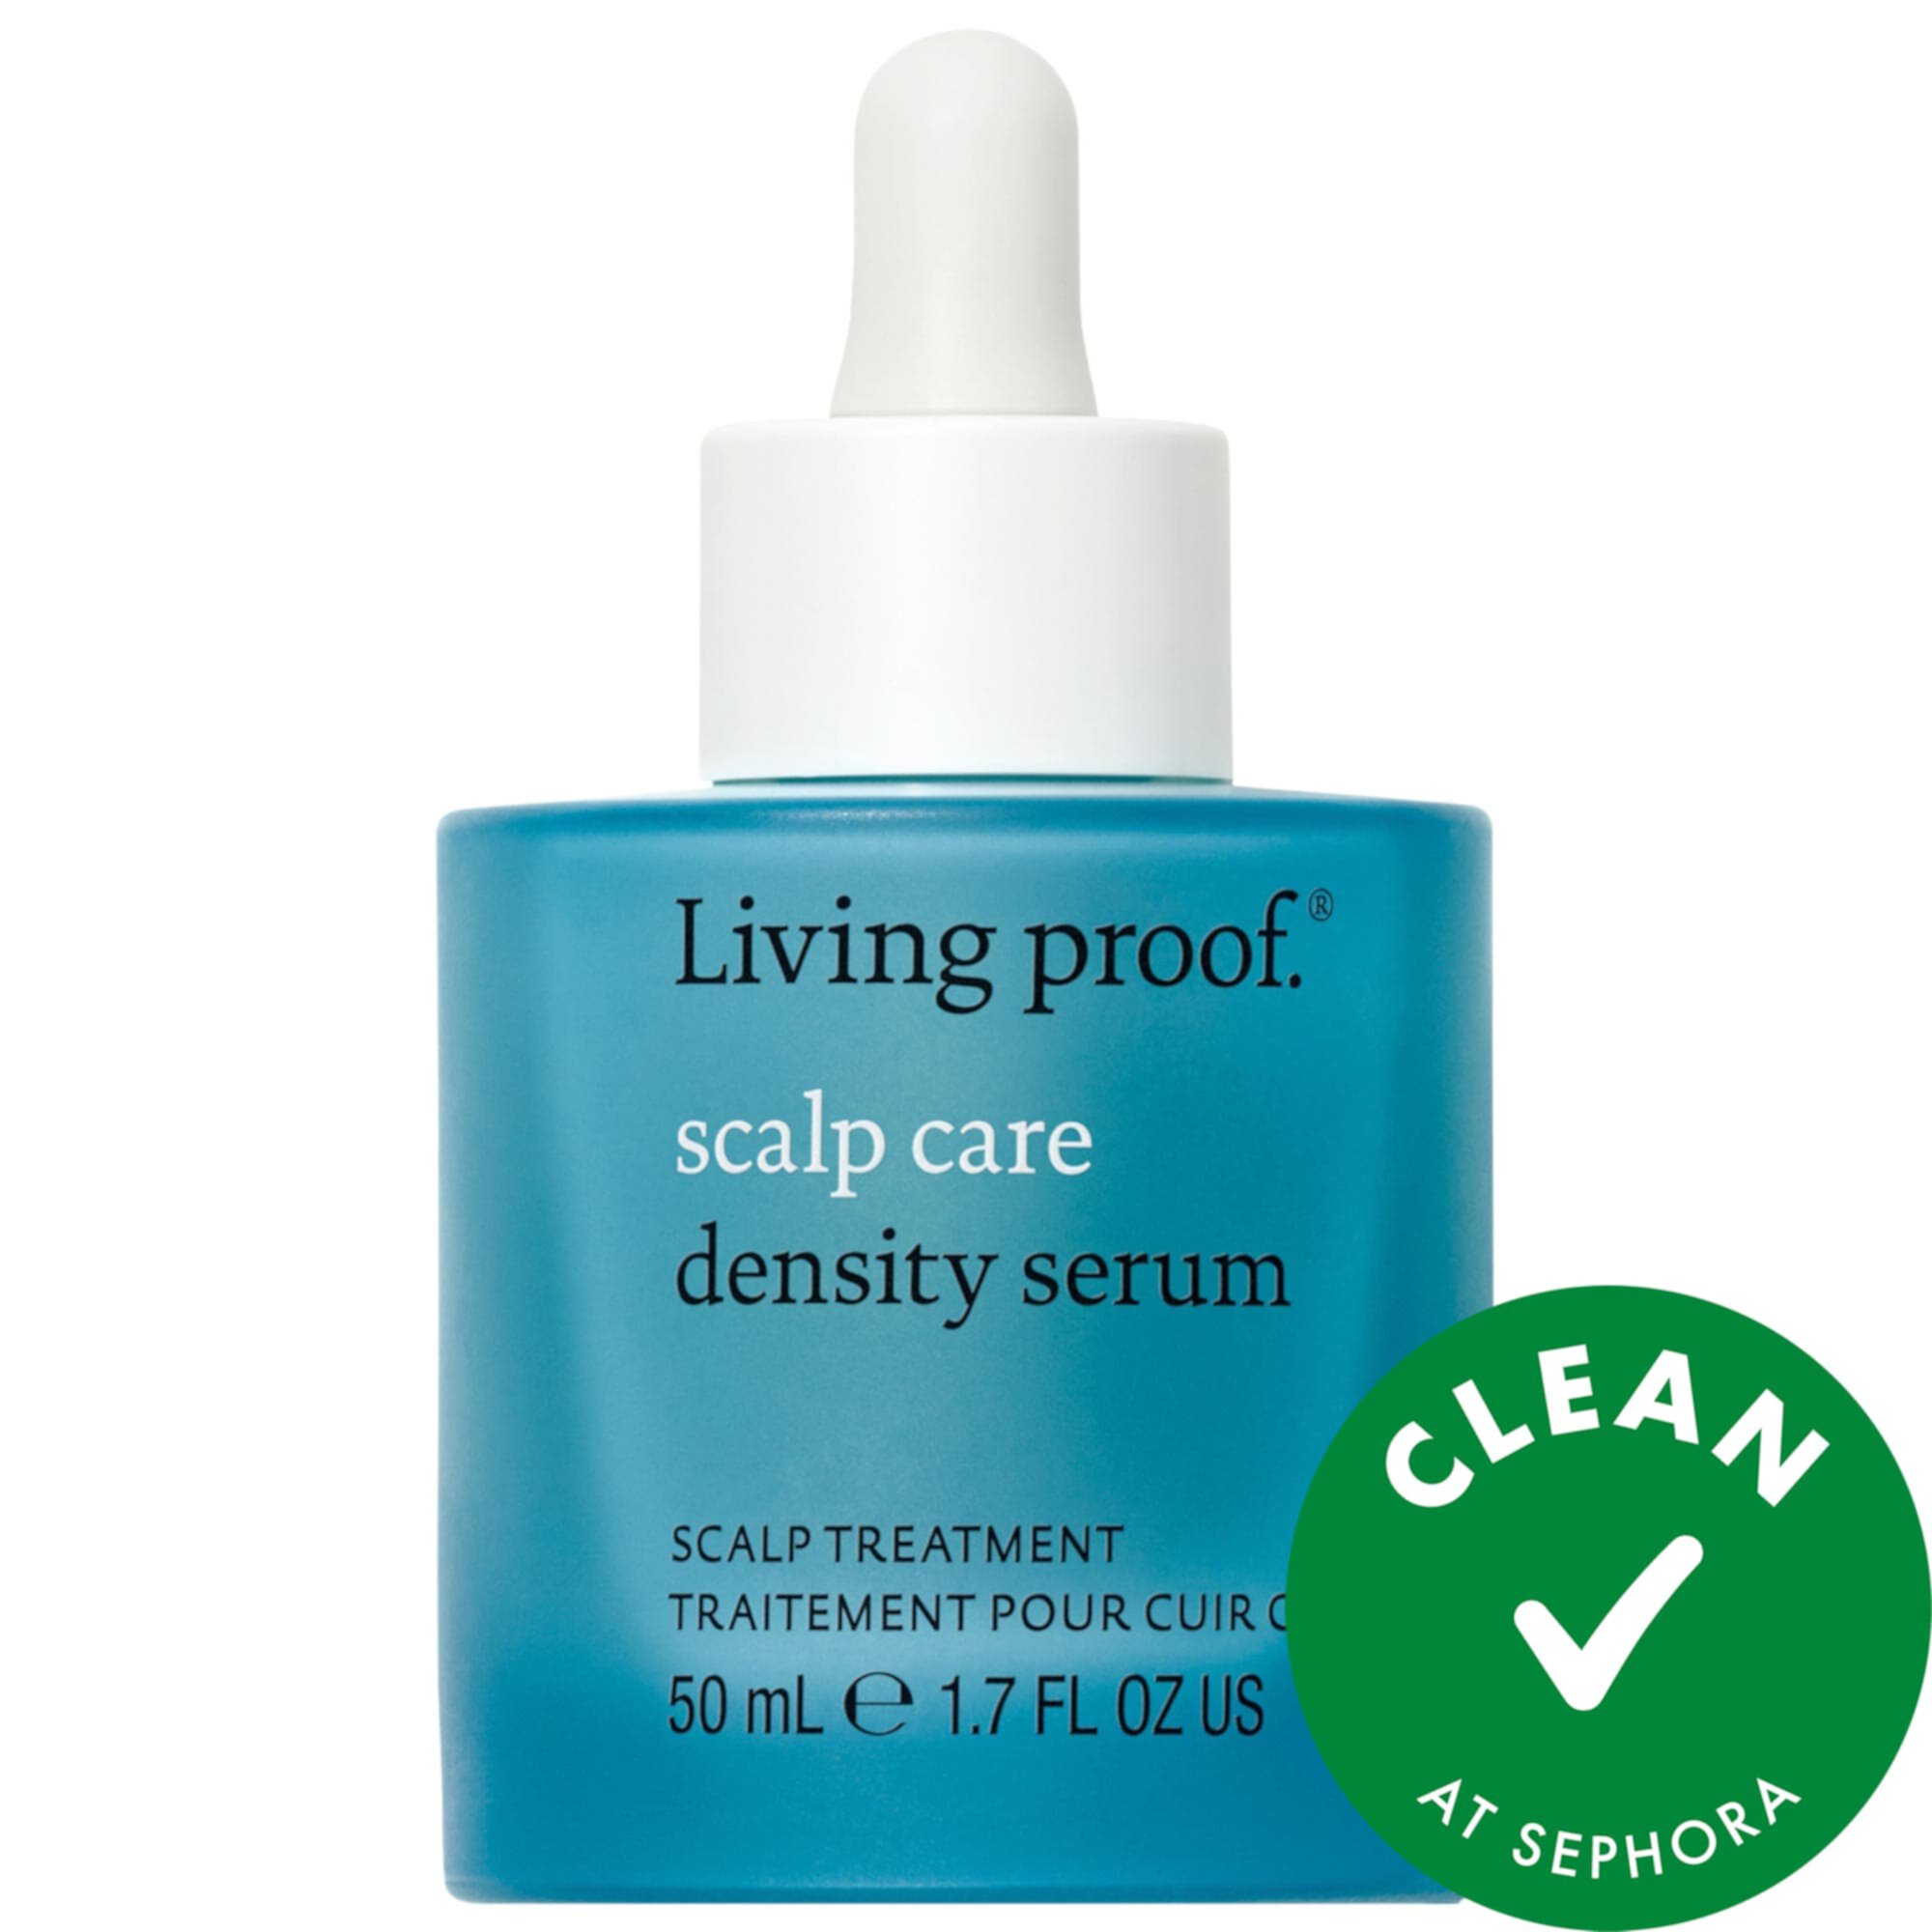 Scalp Care Density Serum for Thinning & Greying Hair LIVING PROOF